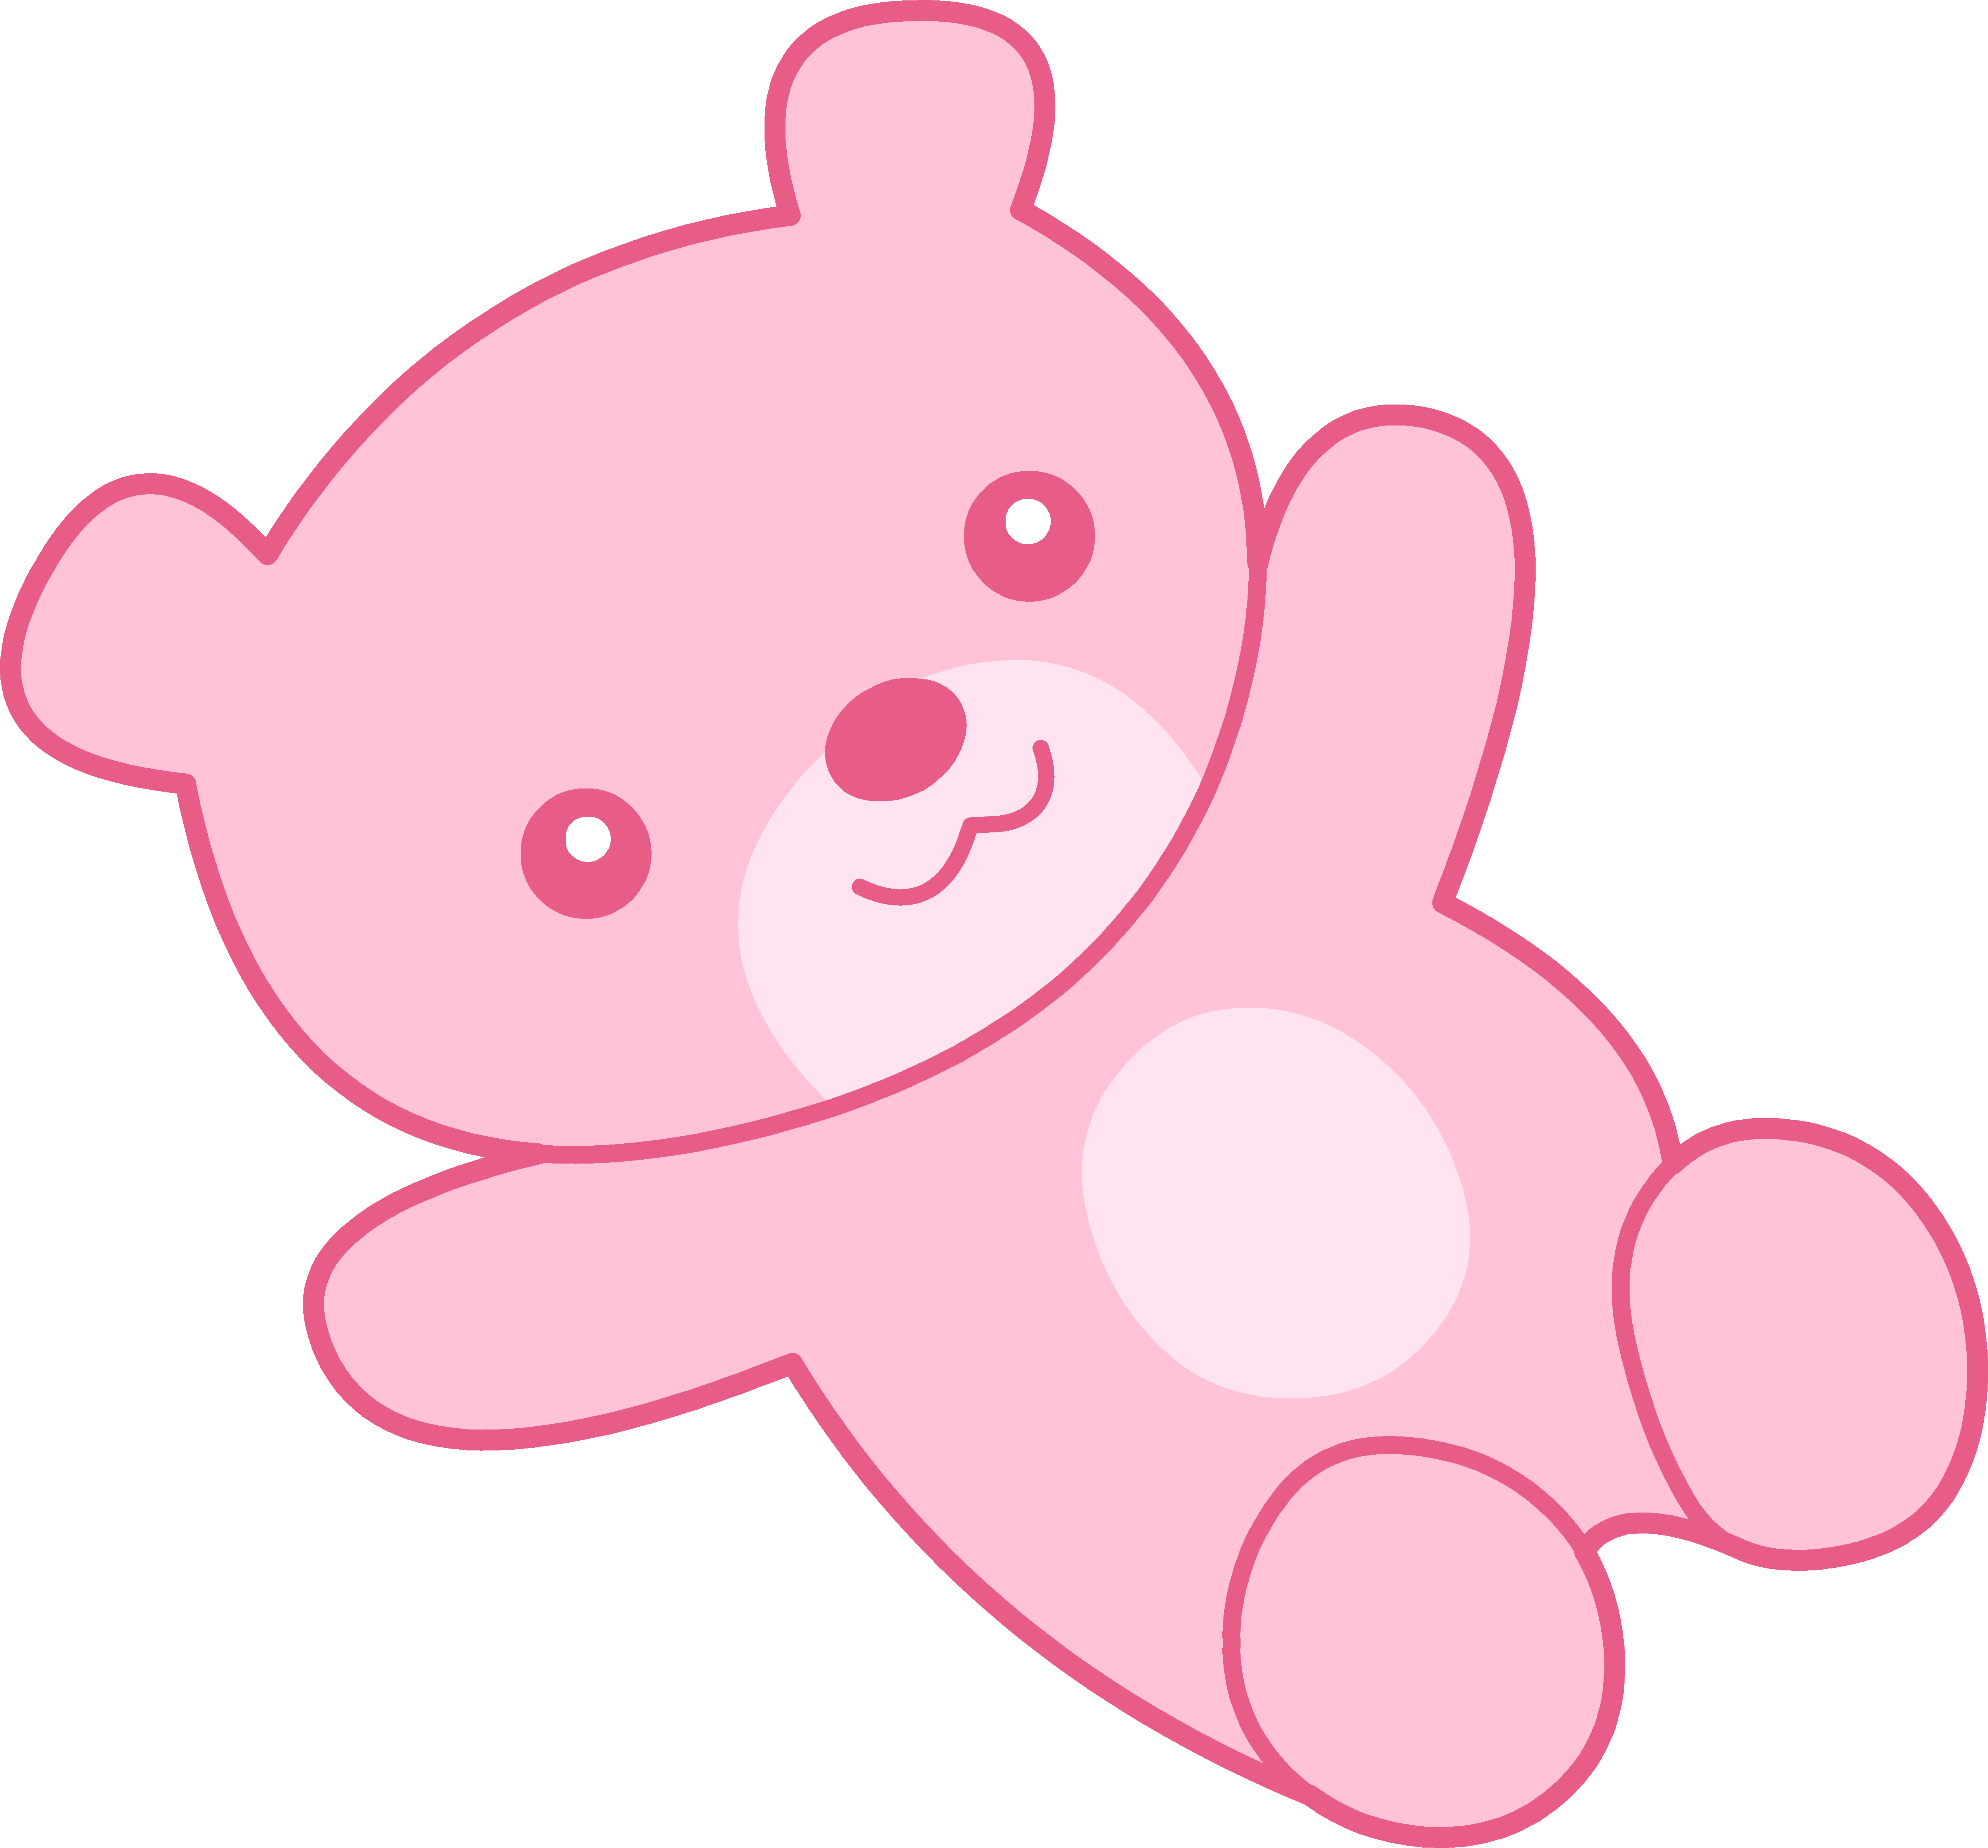 Cute Pink Teddy Bear Png Image Clipart